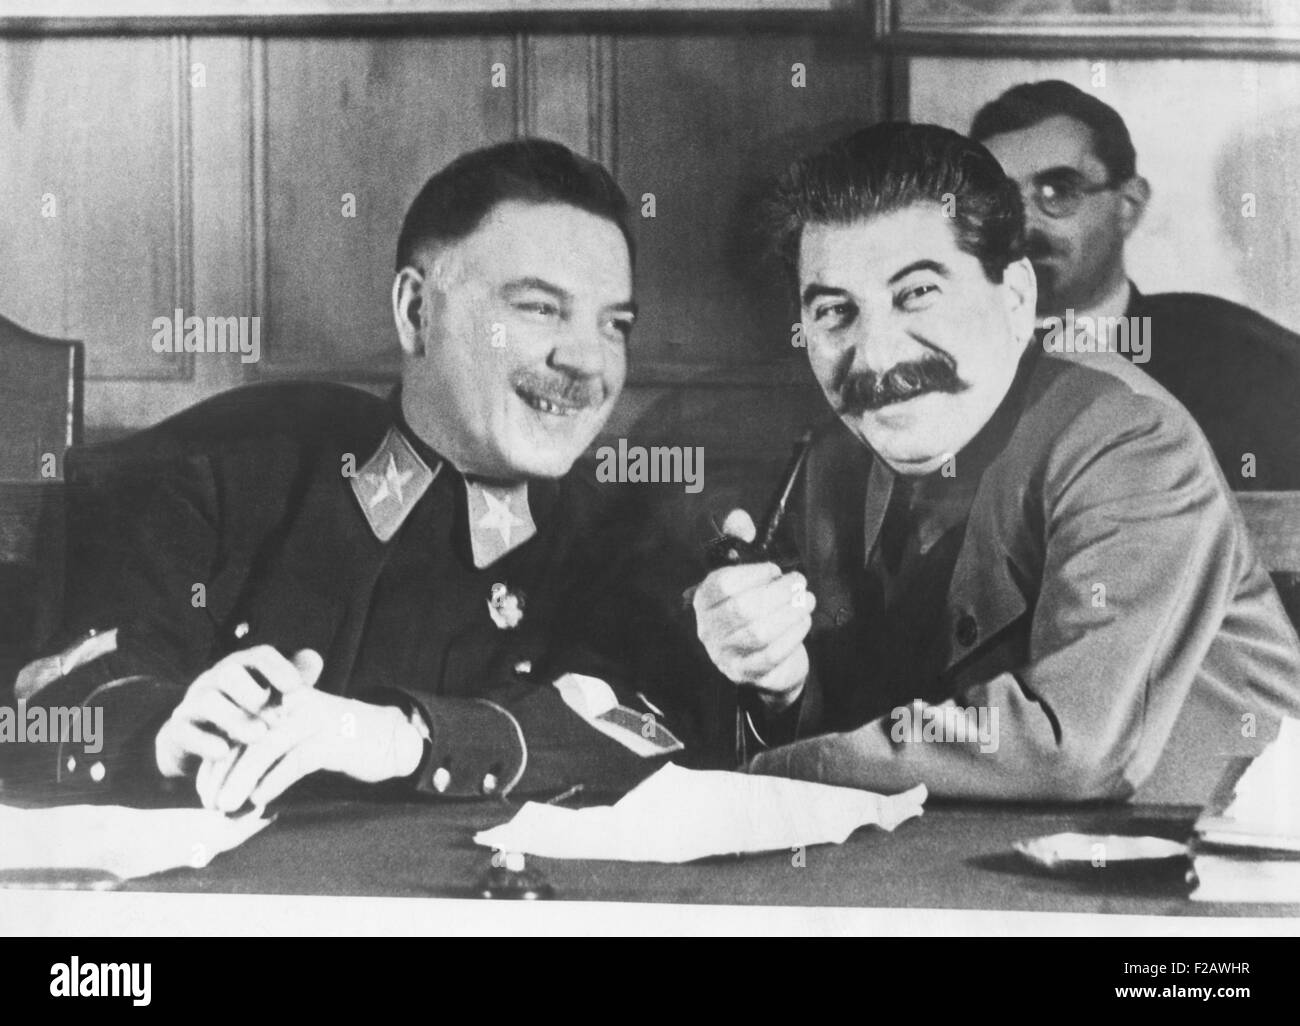 Josef Stalin (left), and Kliment Voroshilov, the Soviet's Chief War Minister, in 1936. Voroshilov relations with Stalin were strained by the trials and executions of many of Russia's military commanders in the Great Purge of the 1930. Voroshilov survived to commanded the Leningrad Front in World War II. (CSU 2015 11 1366) Stock Photo